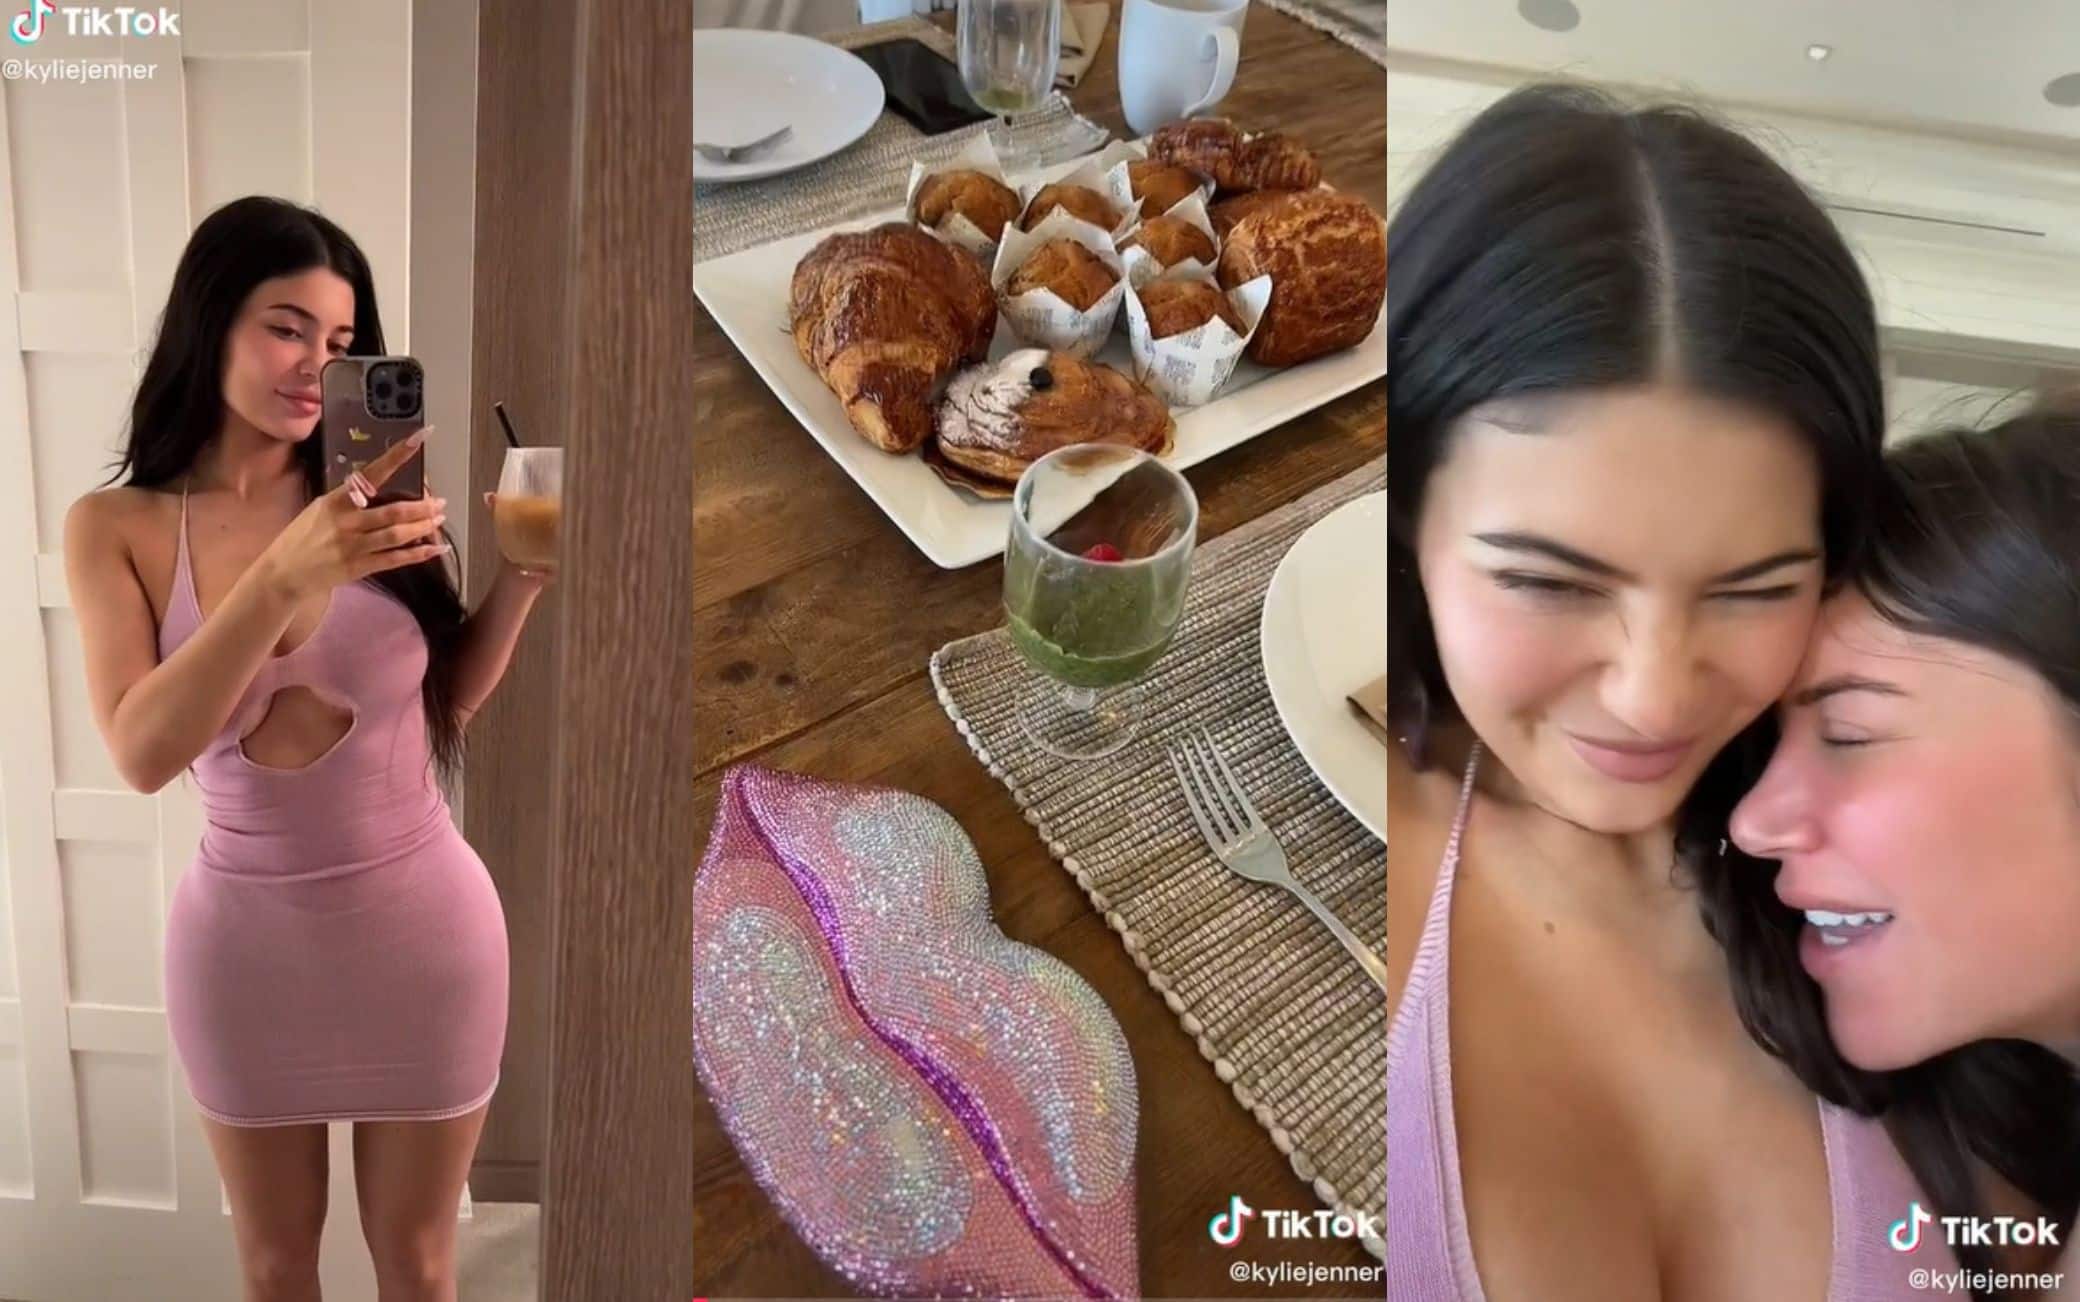 kylie jenner compleanno